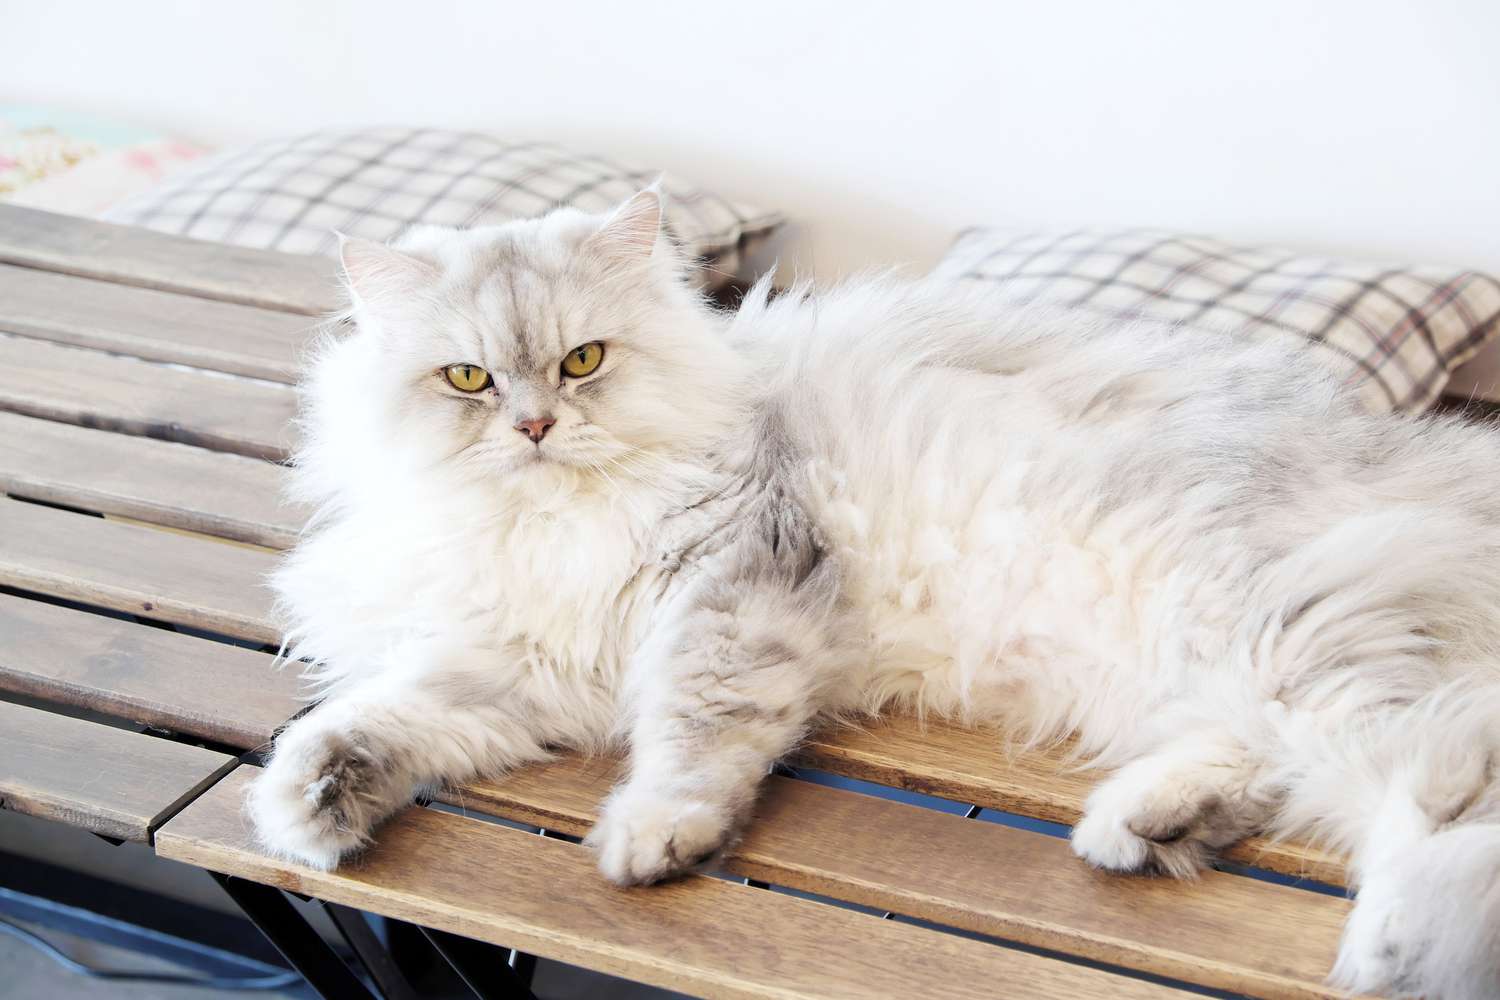 Persian cat lounging on wooden bench.